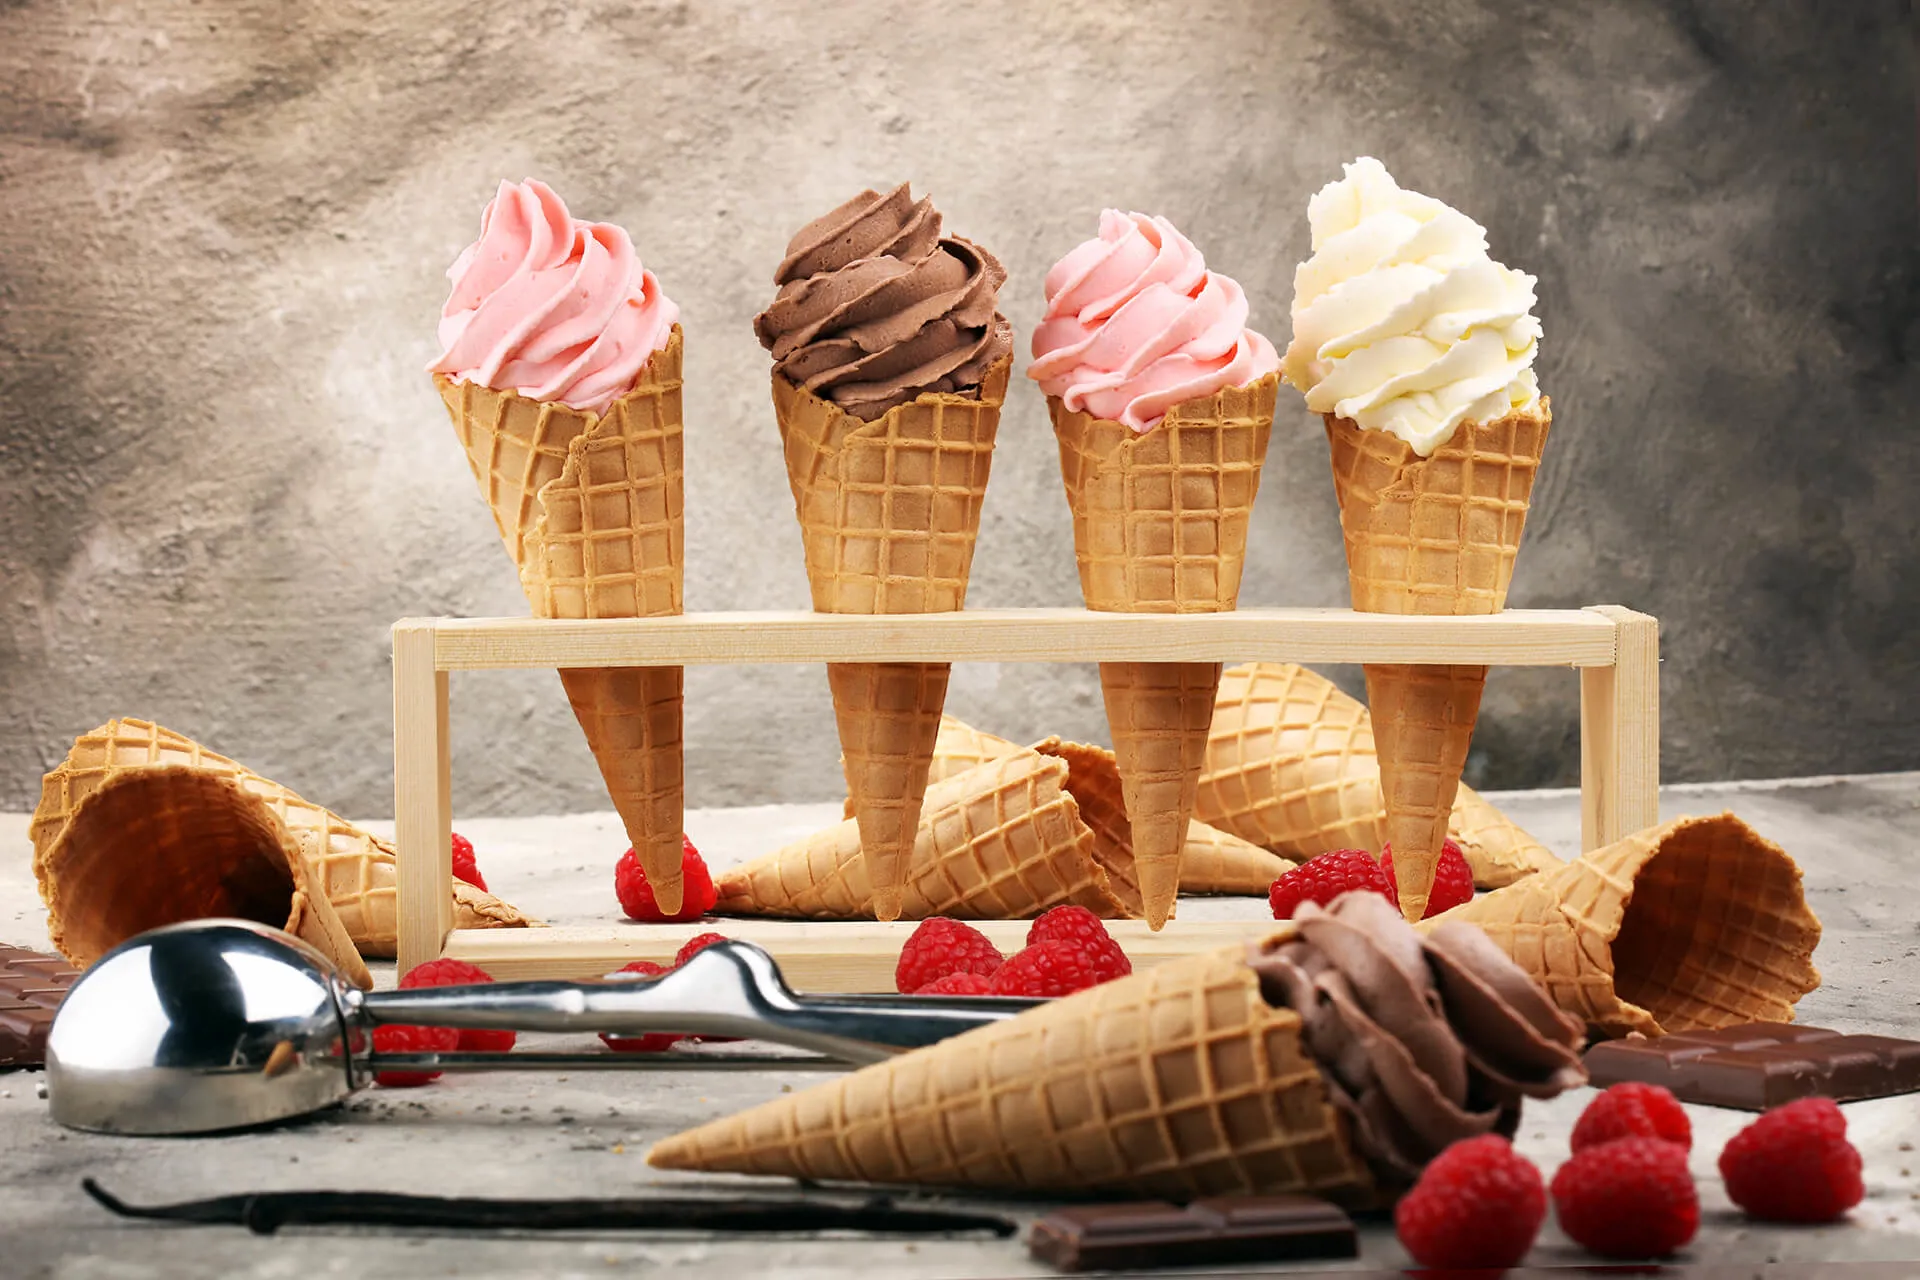 Concentrations of different stabilizers used in ice cream preparation